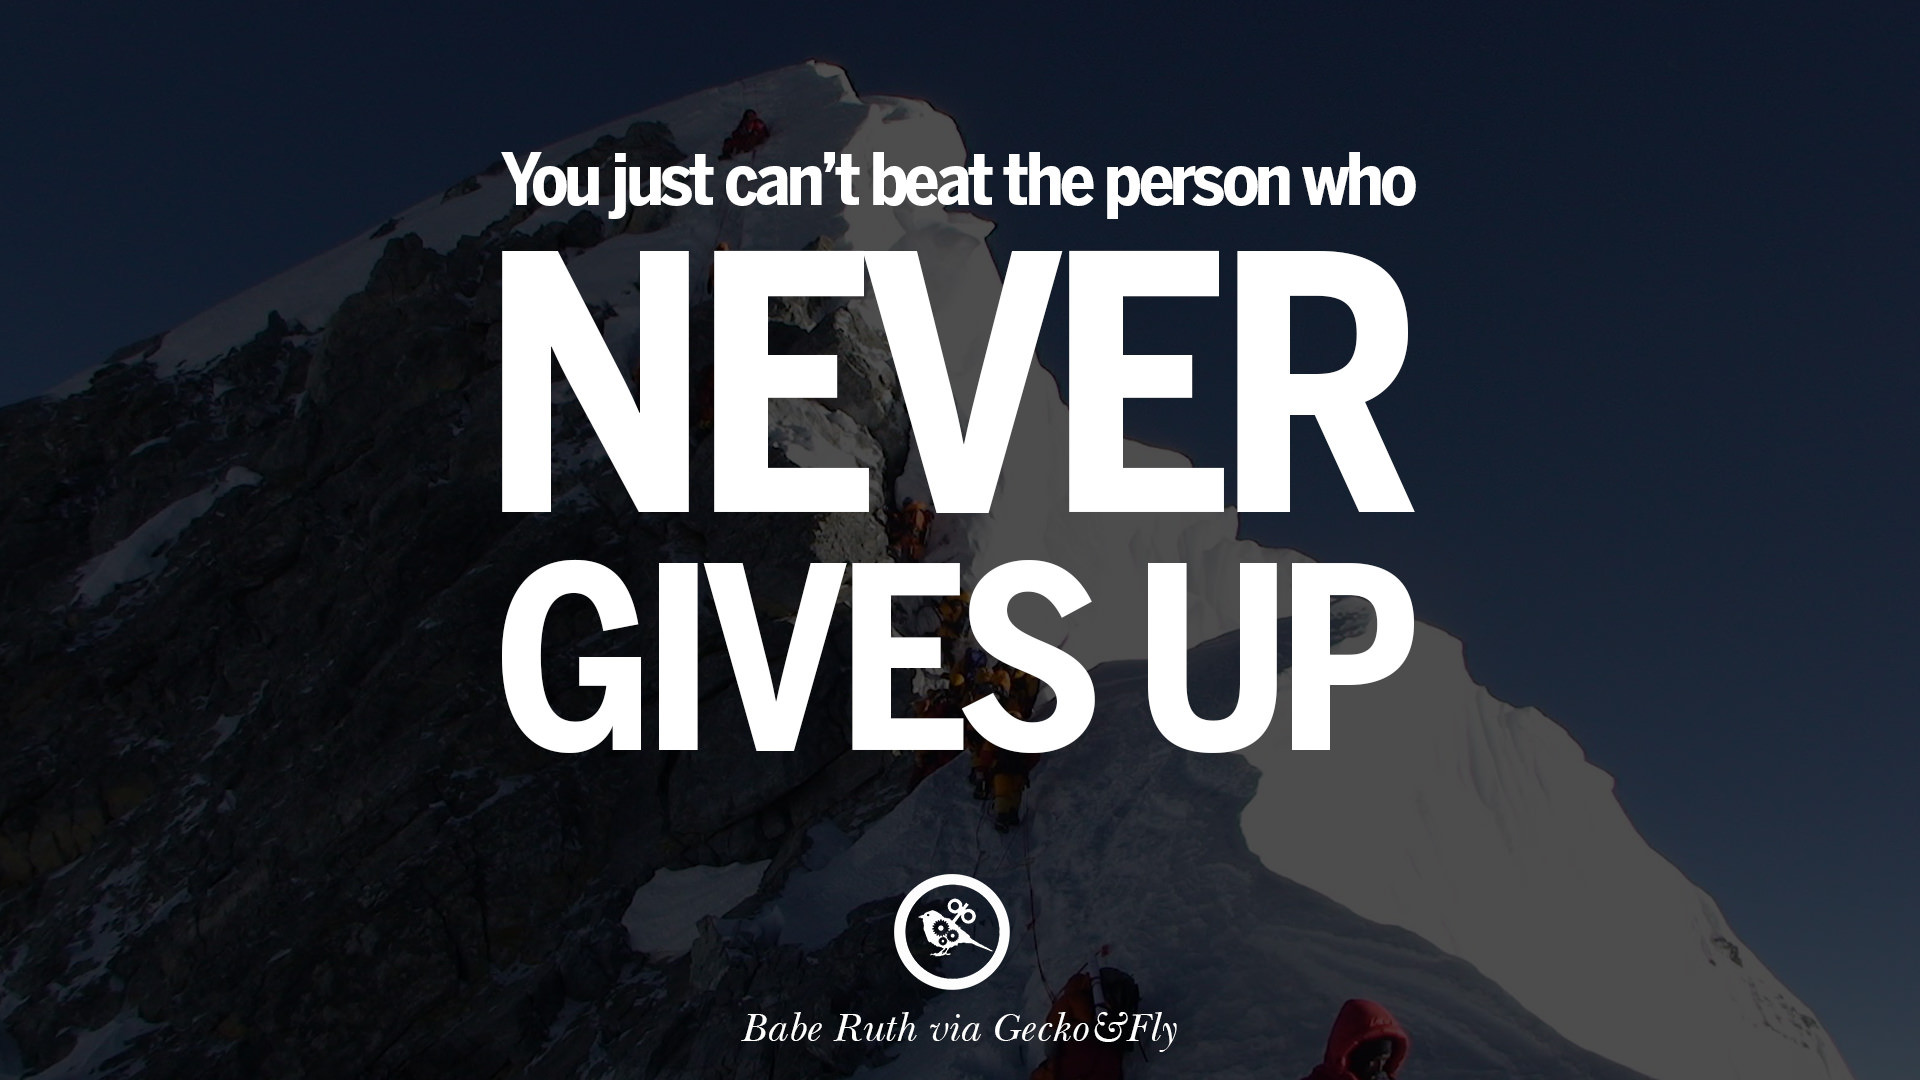 Positive Sports Quotes
 20 Encouraging and Motivational Poster Quotes on Sports